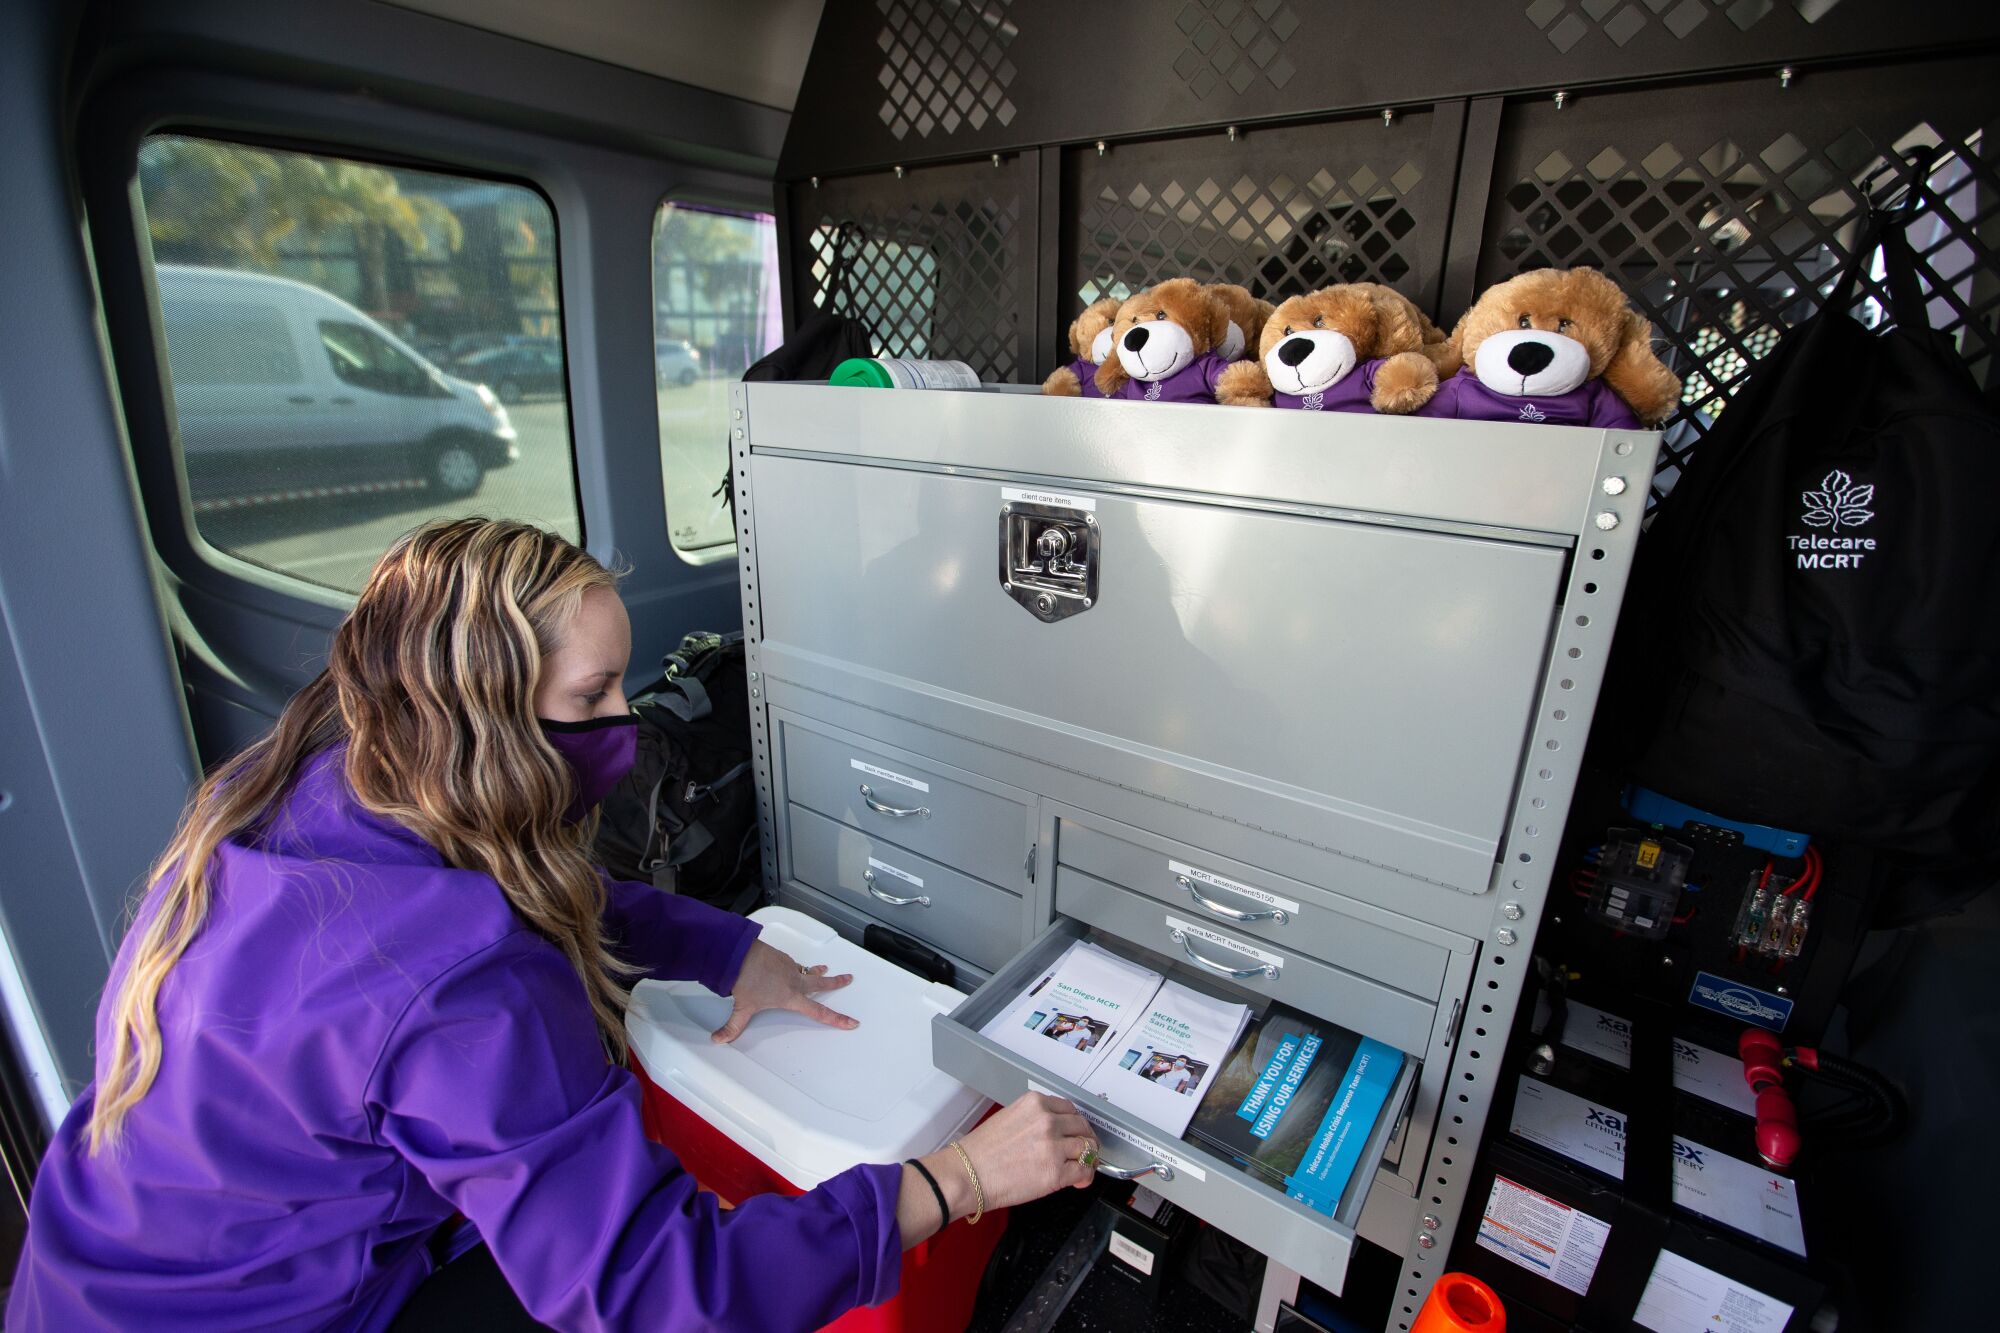 A woman in a purple shirt pulls out a drawer in a specialized van. Three stuffed toy dogs sit on top of a cabinet.